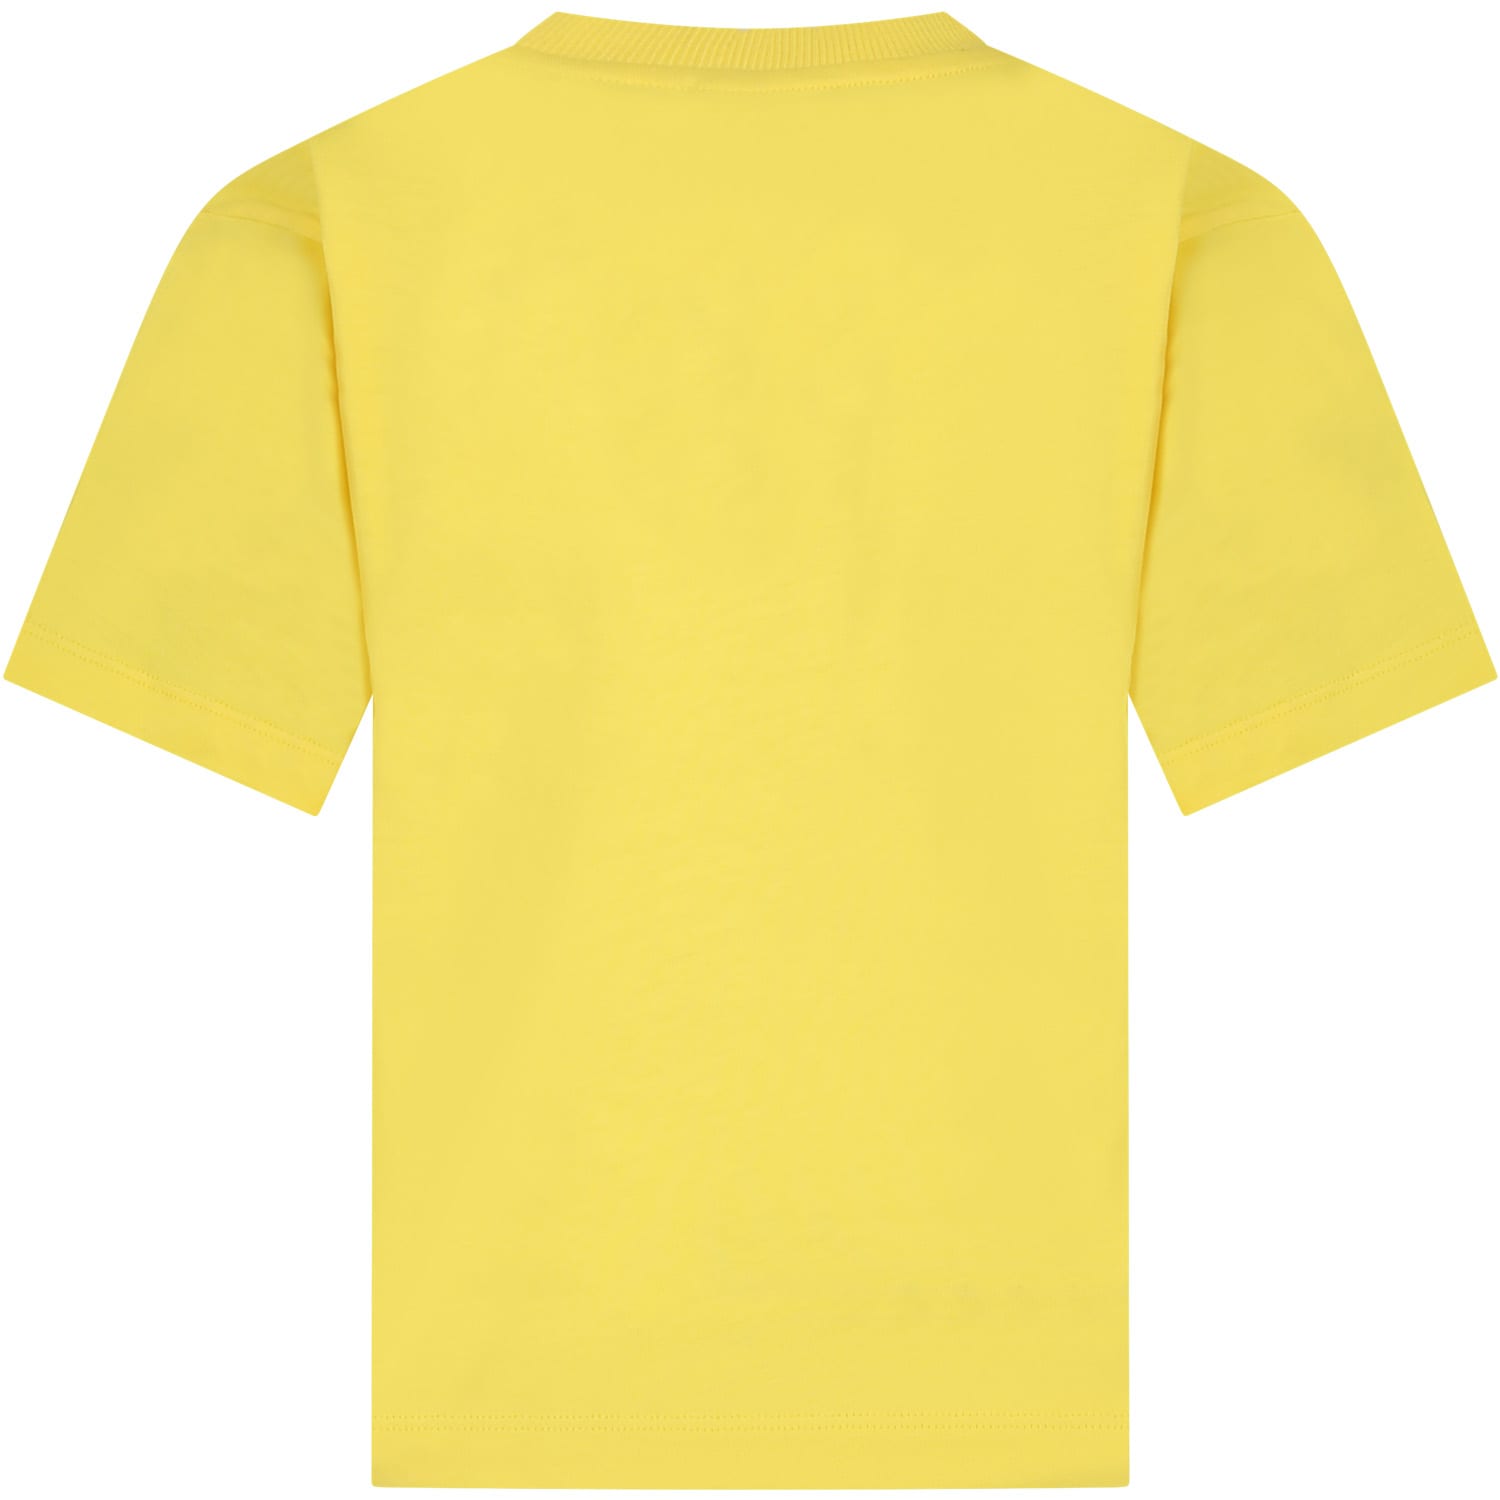 Shop Moschino Yellow T-shirt For Kids With Multicolored Print And Teddy Bear